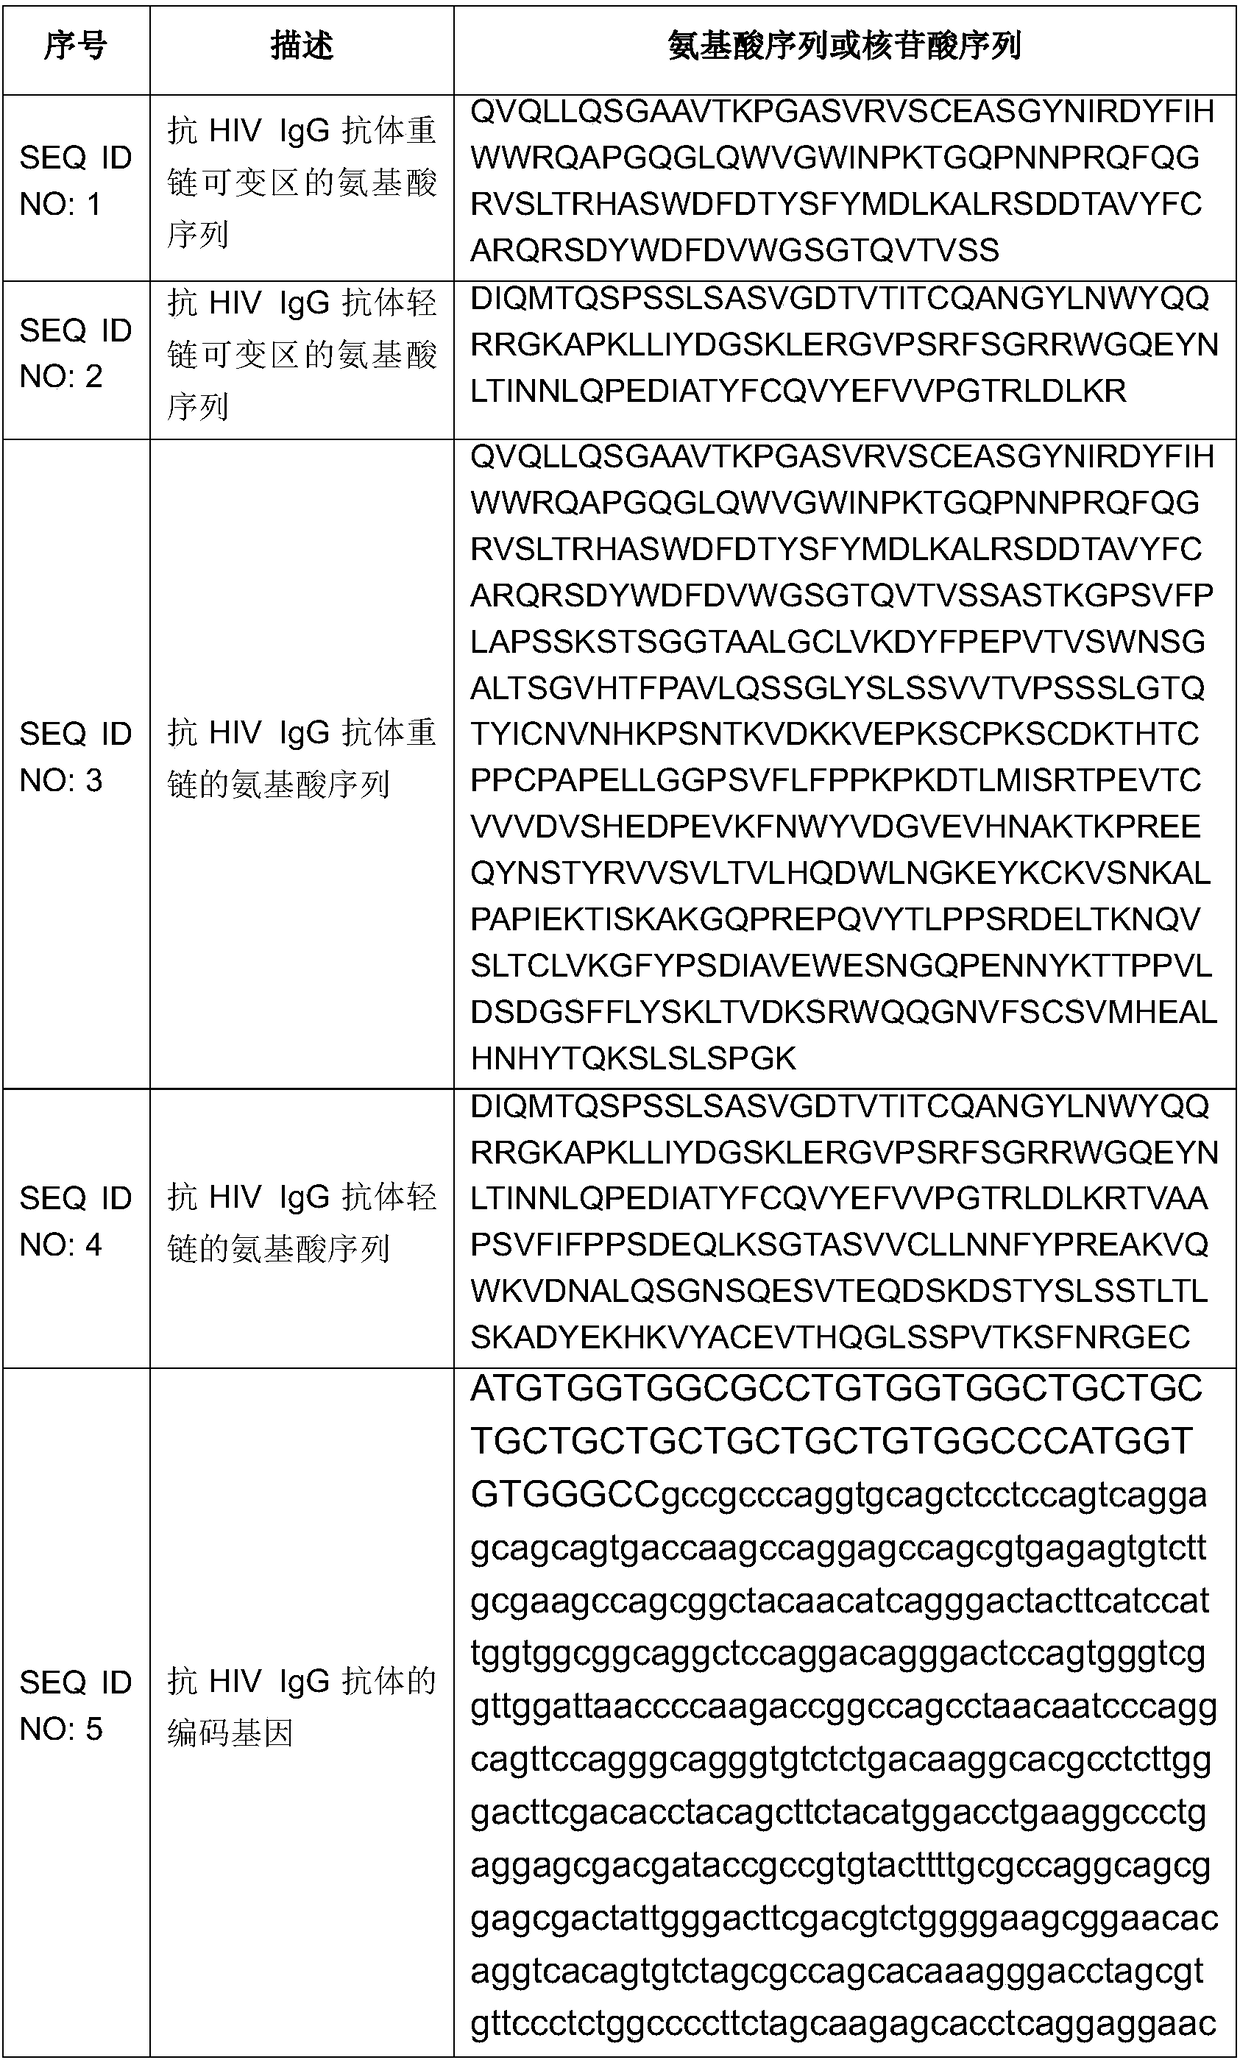 Minicircle DNA carrier expressing IgG antibody, preparation method and application thereof